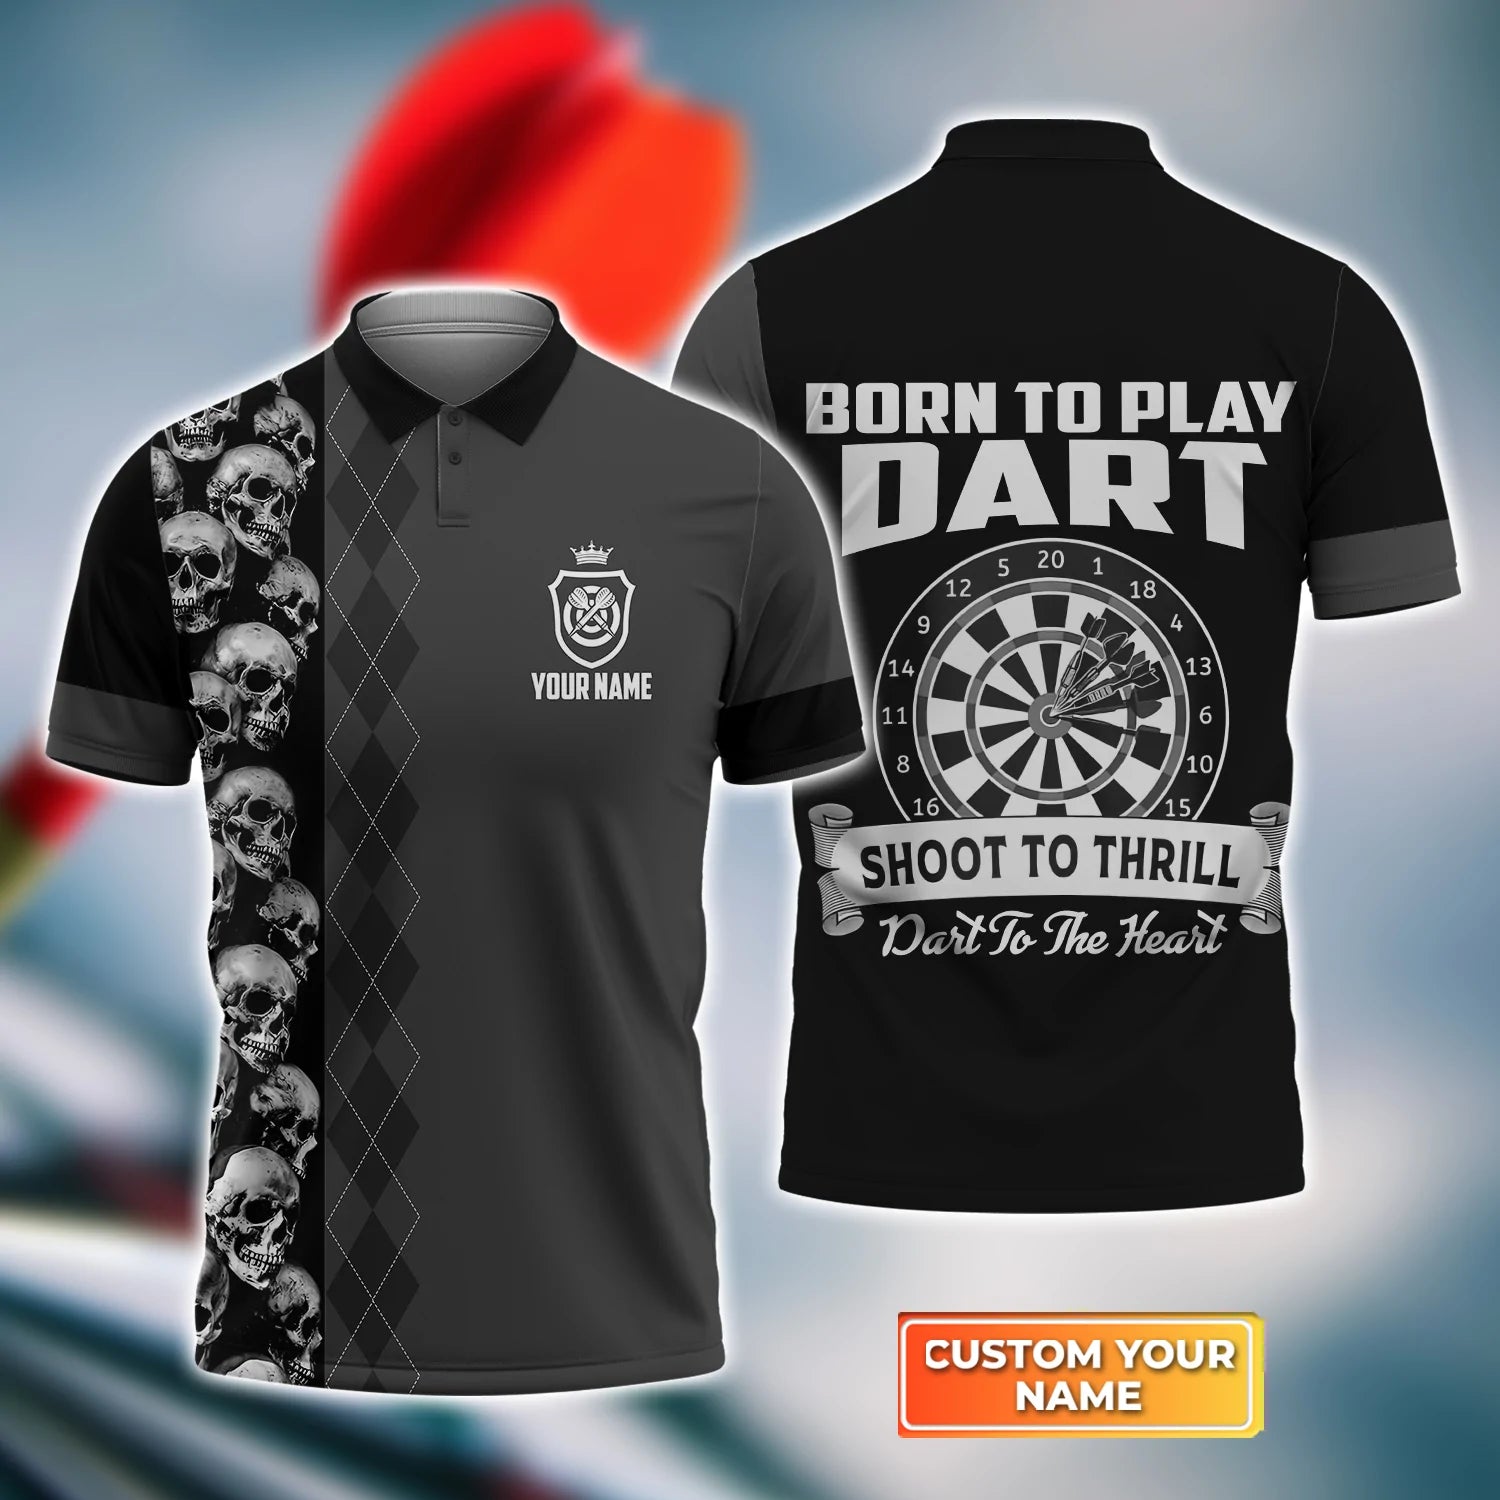 Personalized Name 3D Polo Shirt for Dart Enthusiasts: Shoot to Thrill with Born to Play Design, Men’s Dart Polo Shirt, Team Dart Shirts – DP106